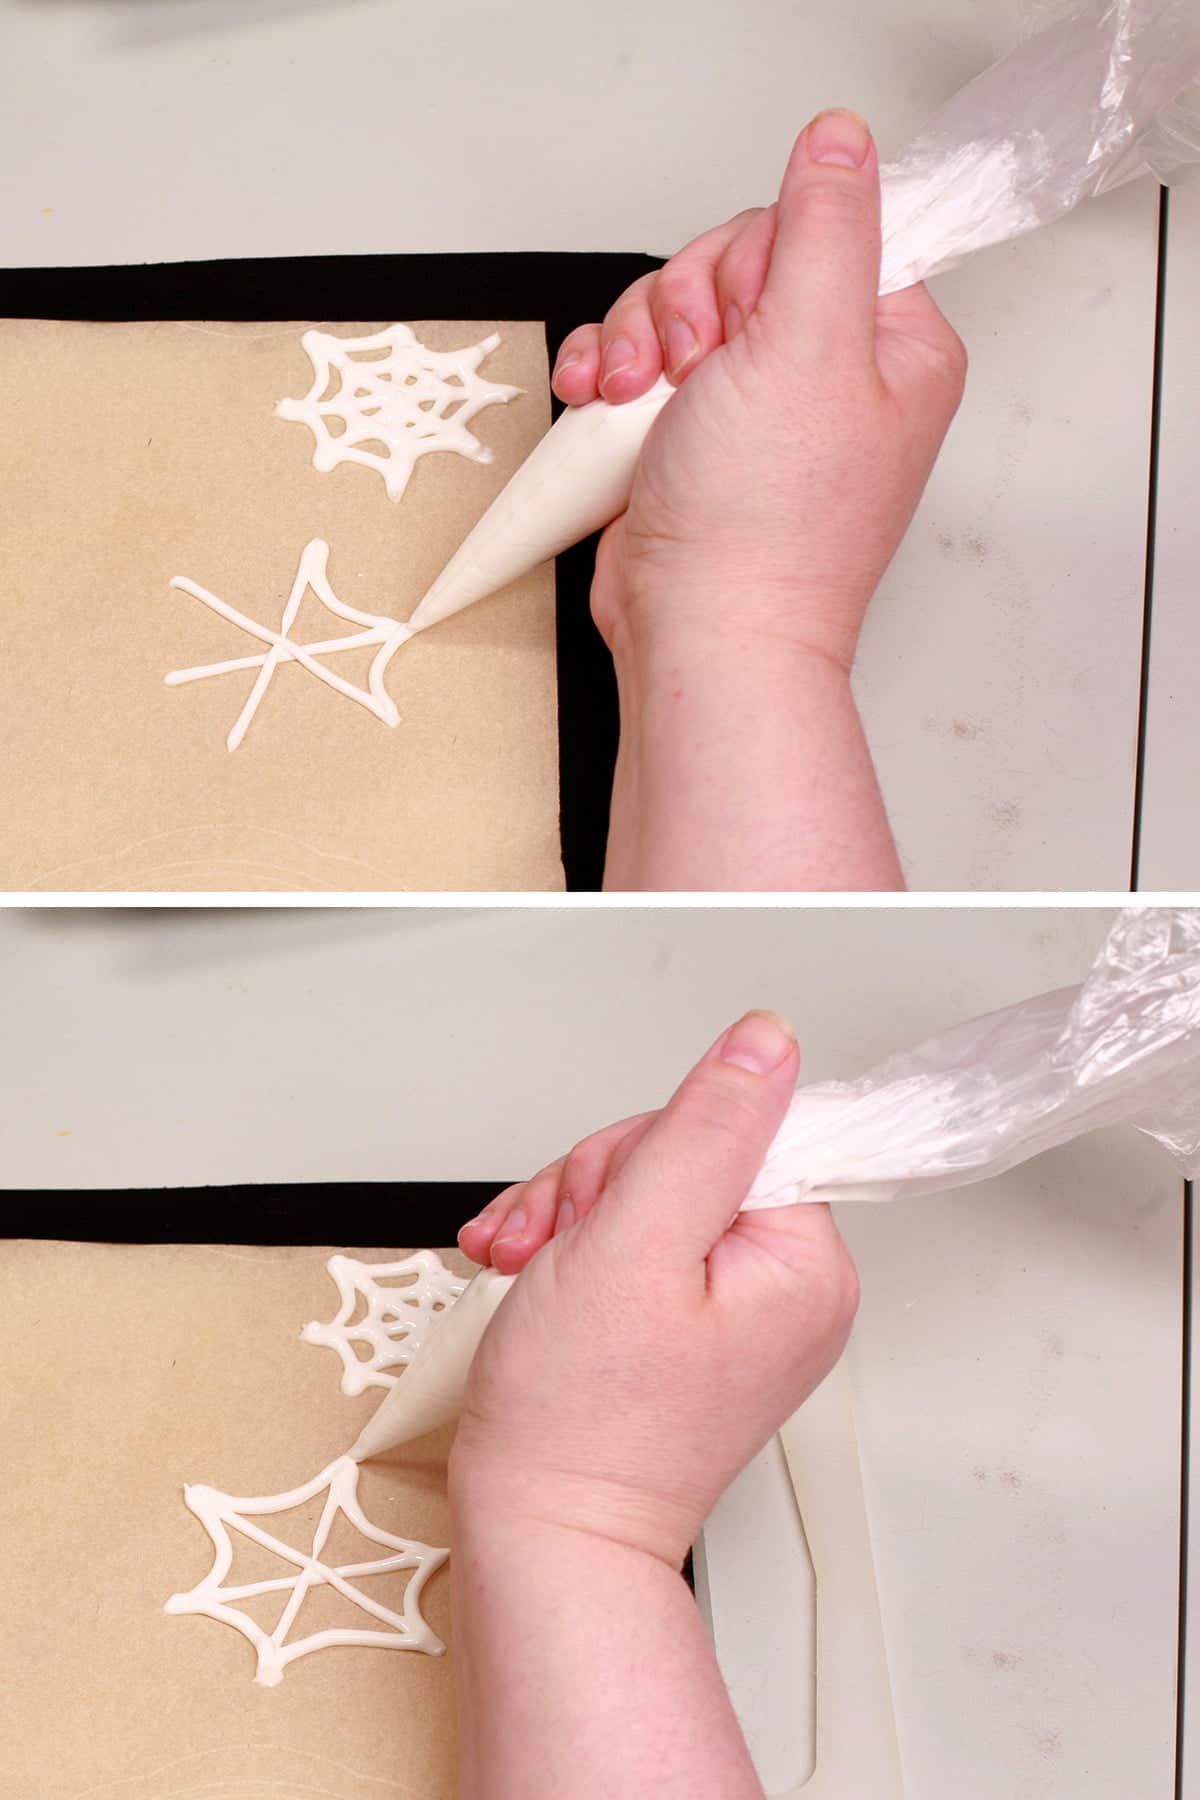 A hand uses a pastry bag full of white royal icing to pipe spider webs on a parchment lined baking sheet.